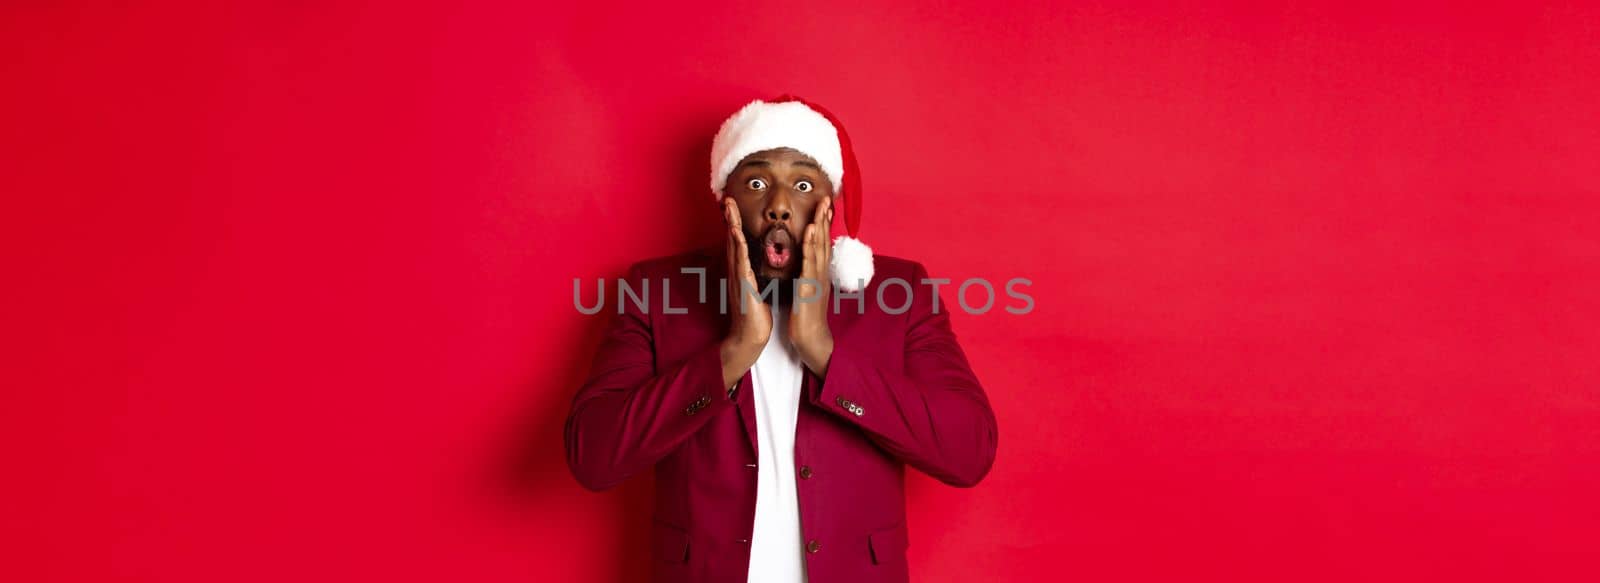 Christmas, party and holidays concept. Shocked Black man in santa hat reacting to new year offer, standing against red background.